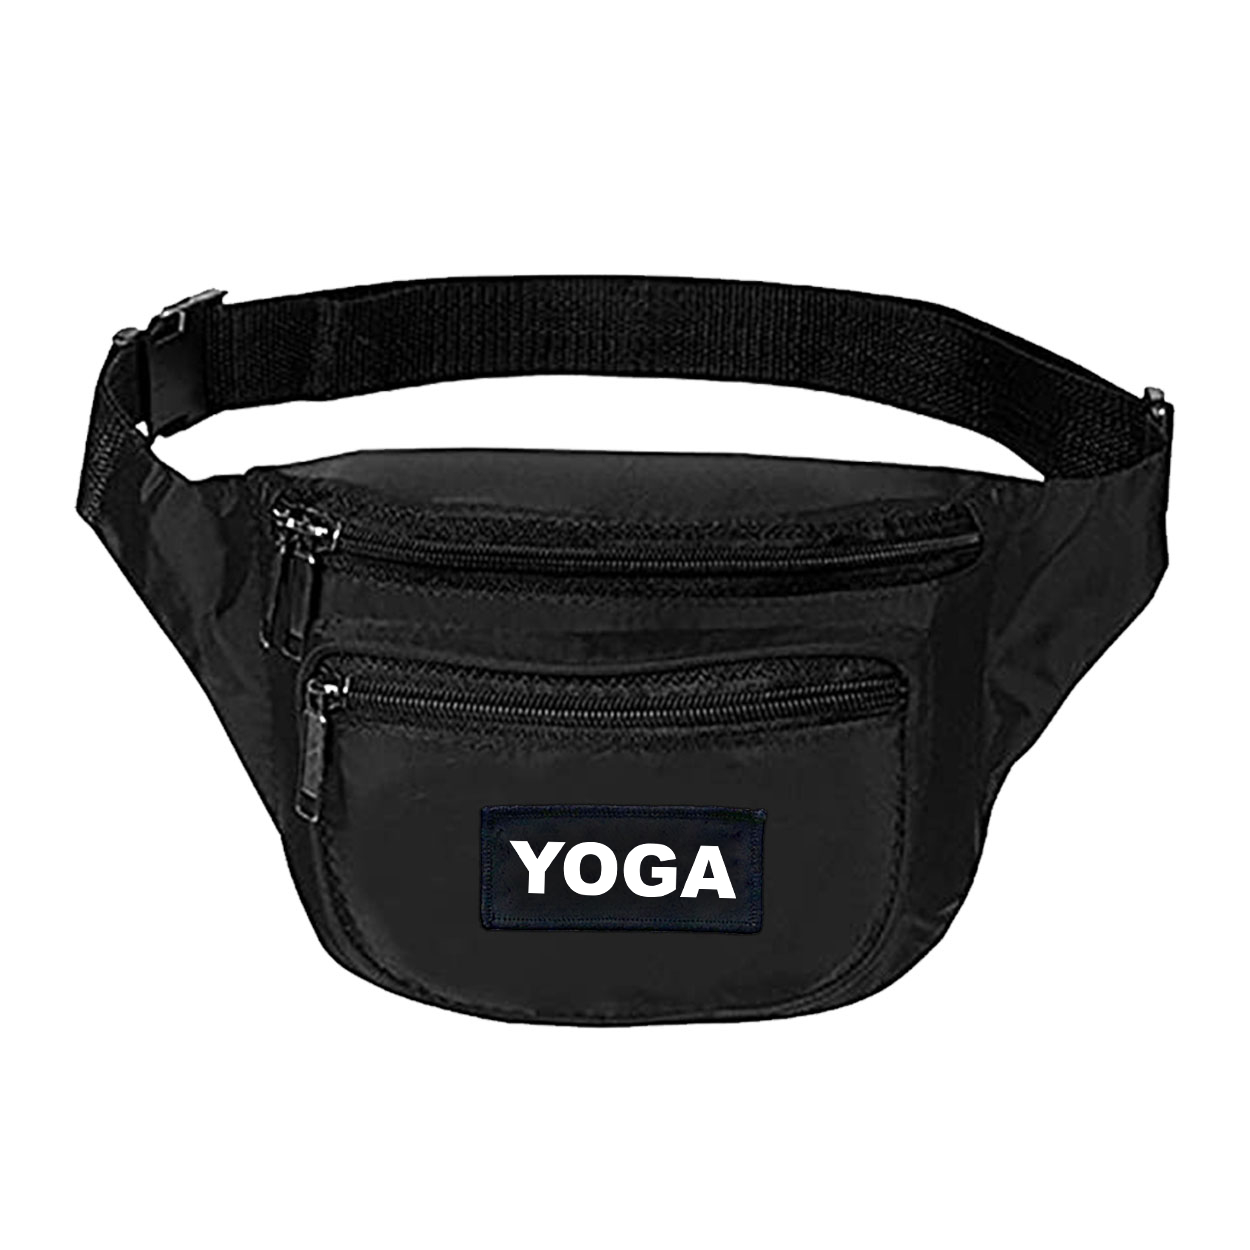 Yoga Brand Logo Night Out Woven Patch Fanny Pack Black